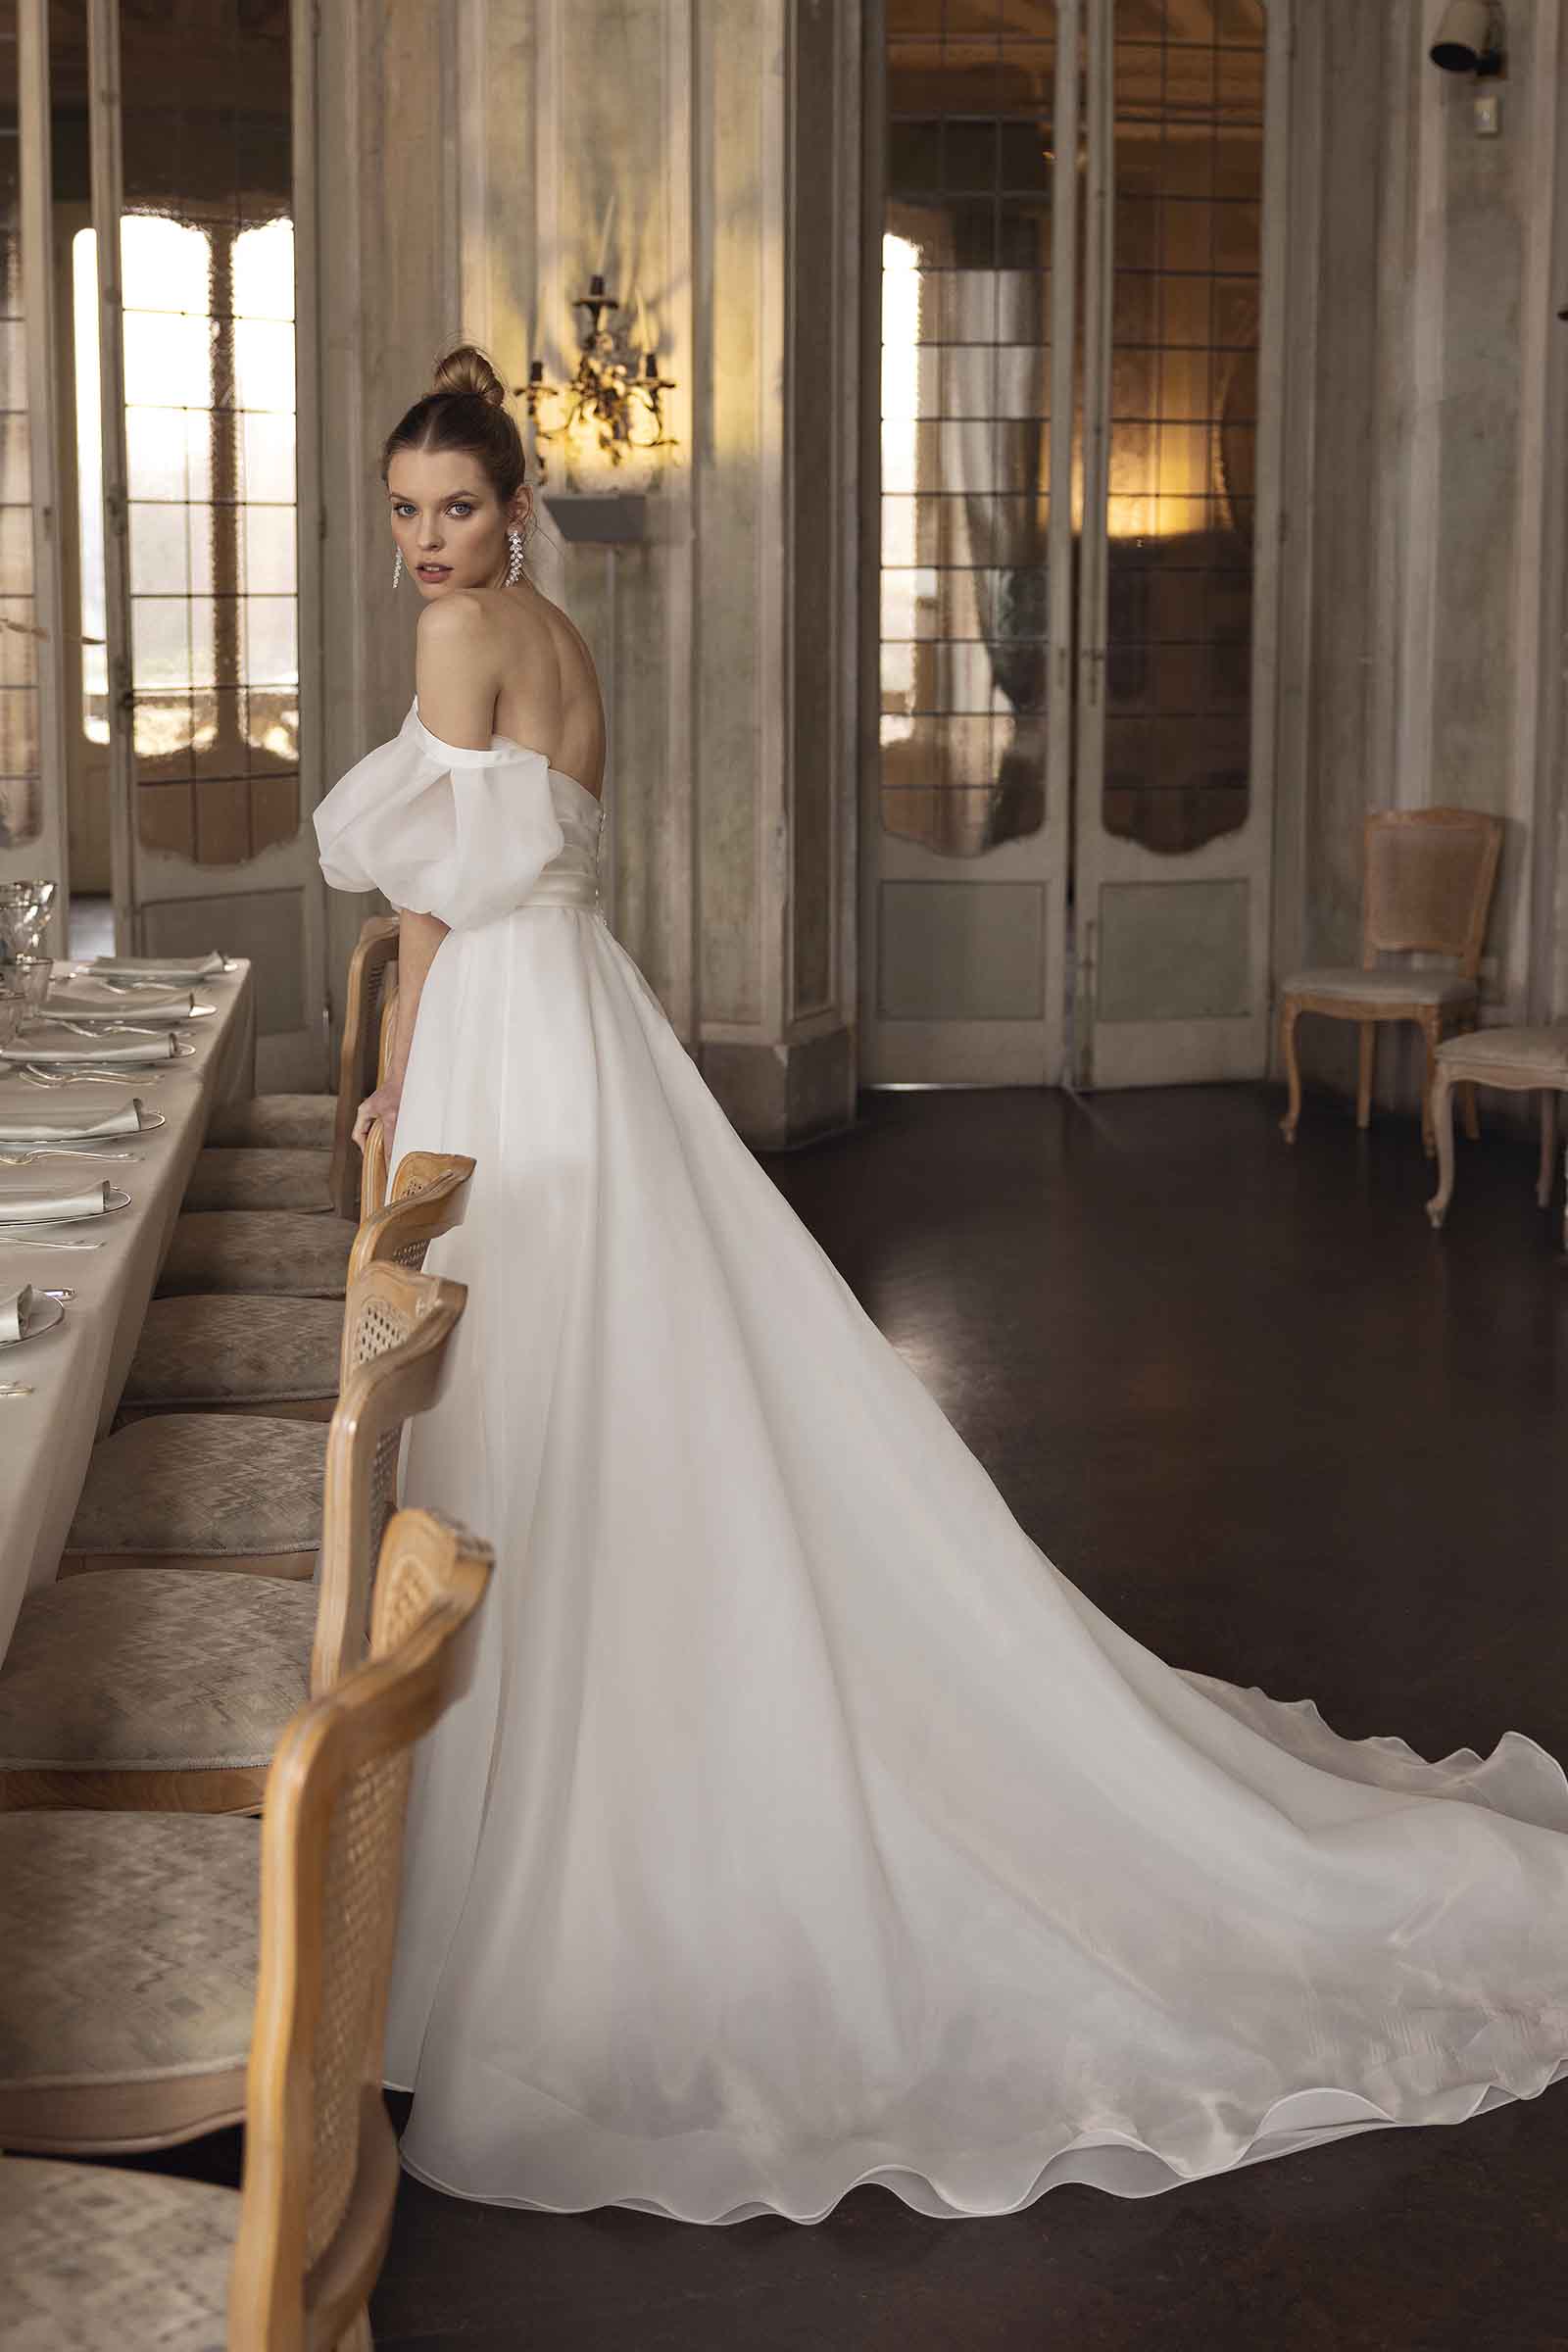 A-line Wedding Dress With Sweetheart Neckline And Detachable Balloon Sleeves by Maison Signore - Image 1